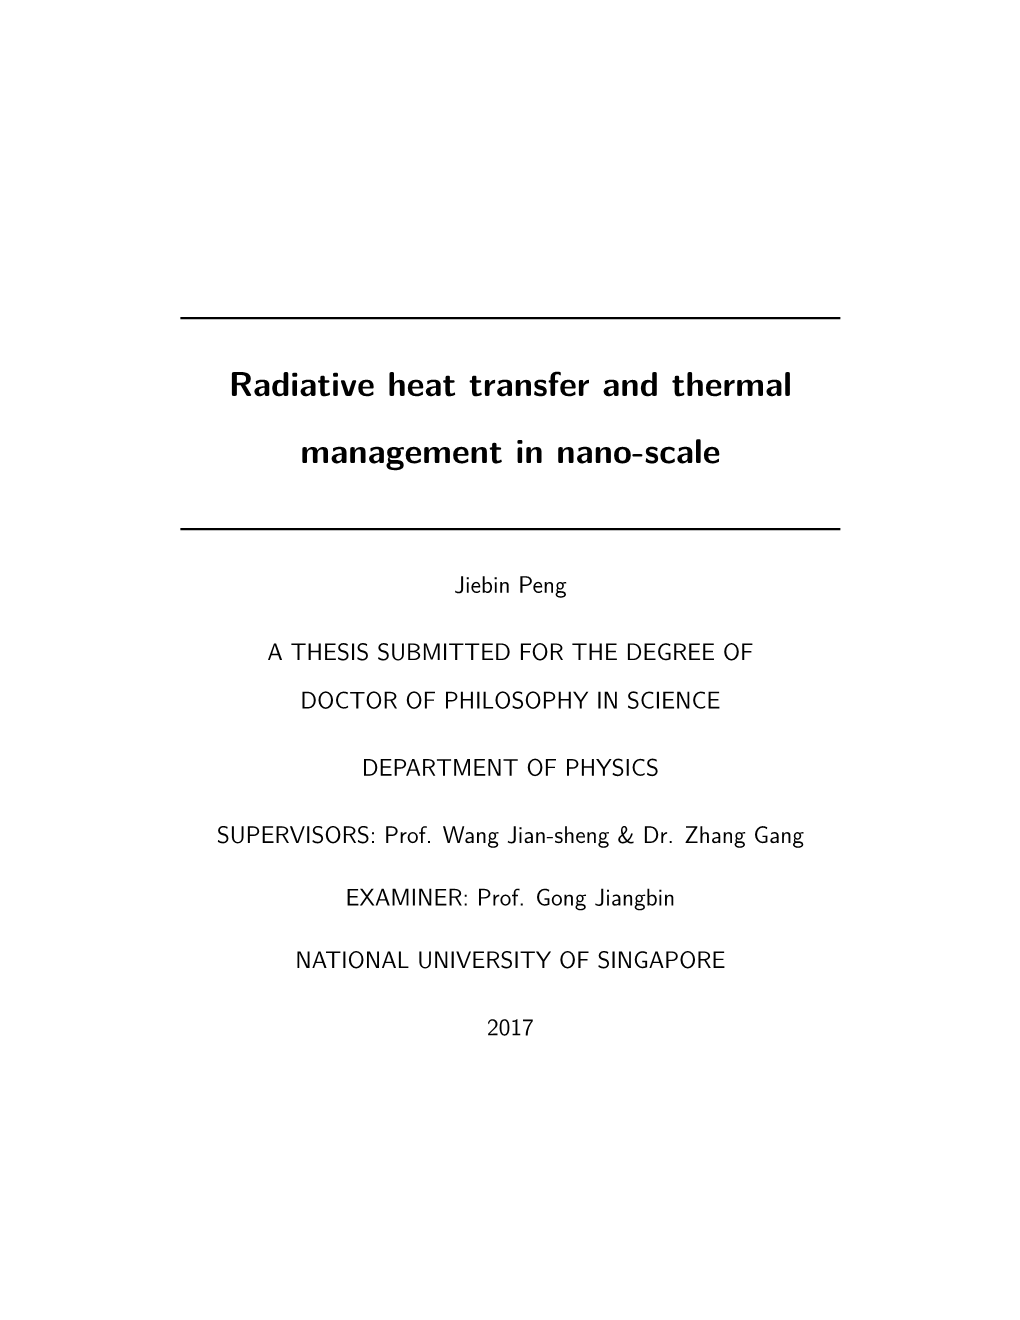 Radiative Heat Transfer and Thermal Management in Nano-Scale